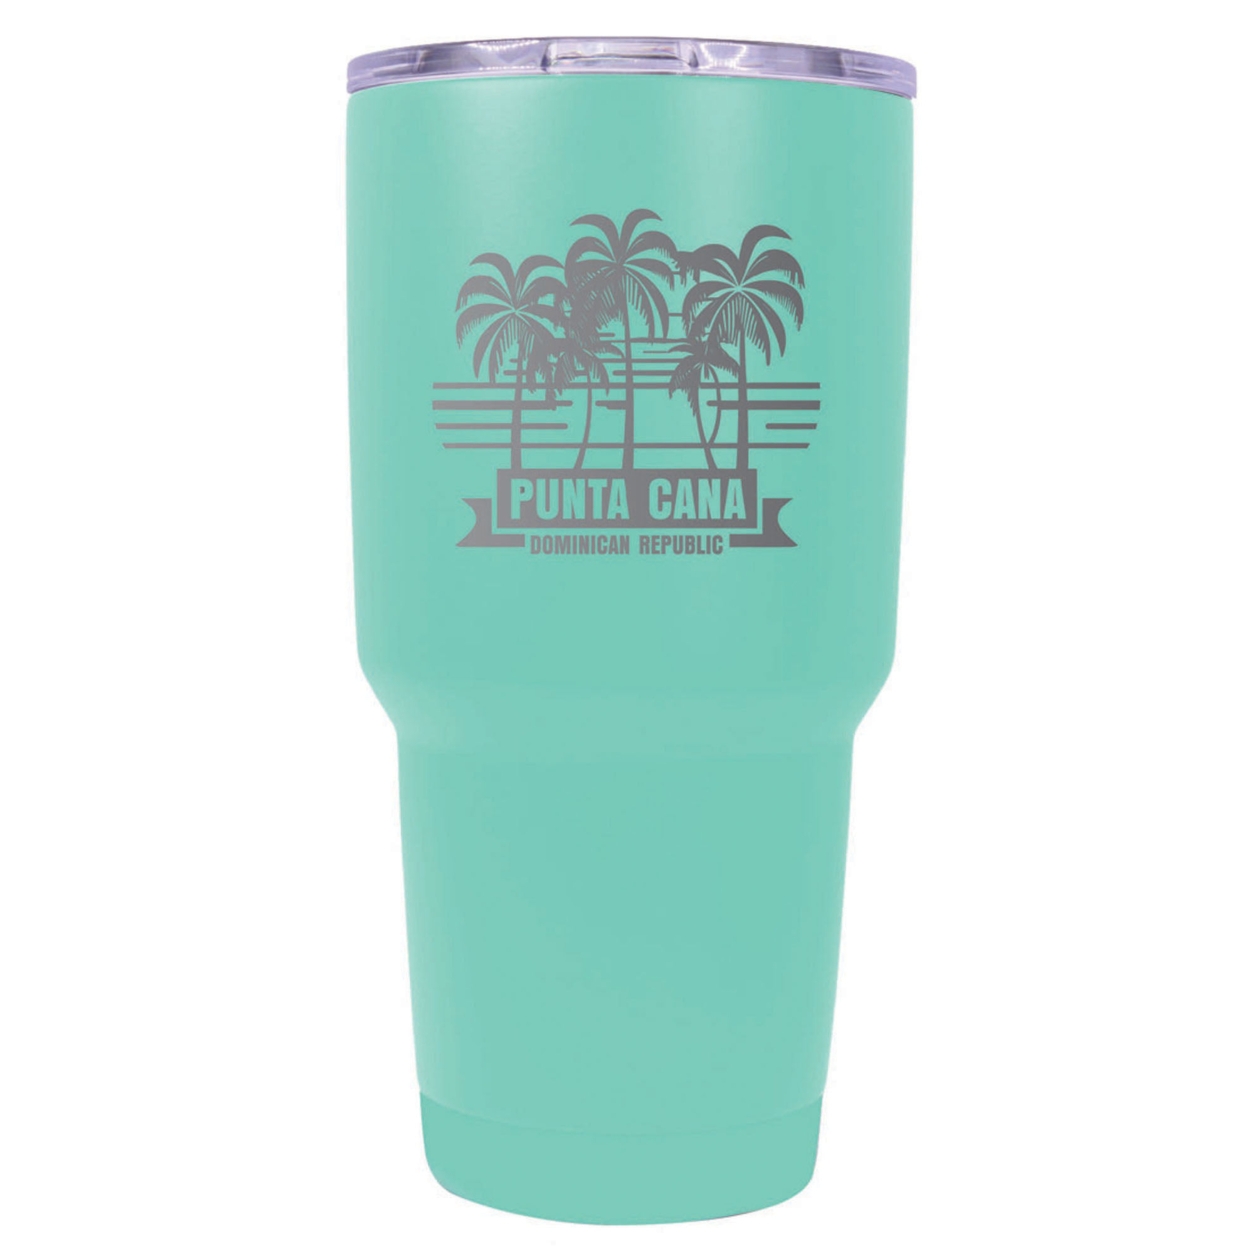 Punta Cana Dominican Republic Souvenir 24 Oz Insulated Stainless Steel Tumbler Etched - Seafoam, PALM BEACH